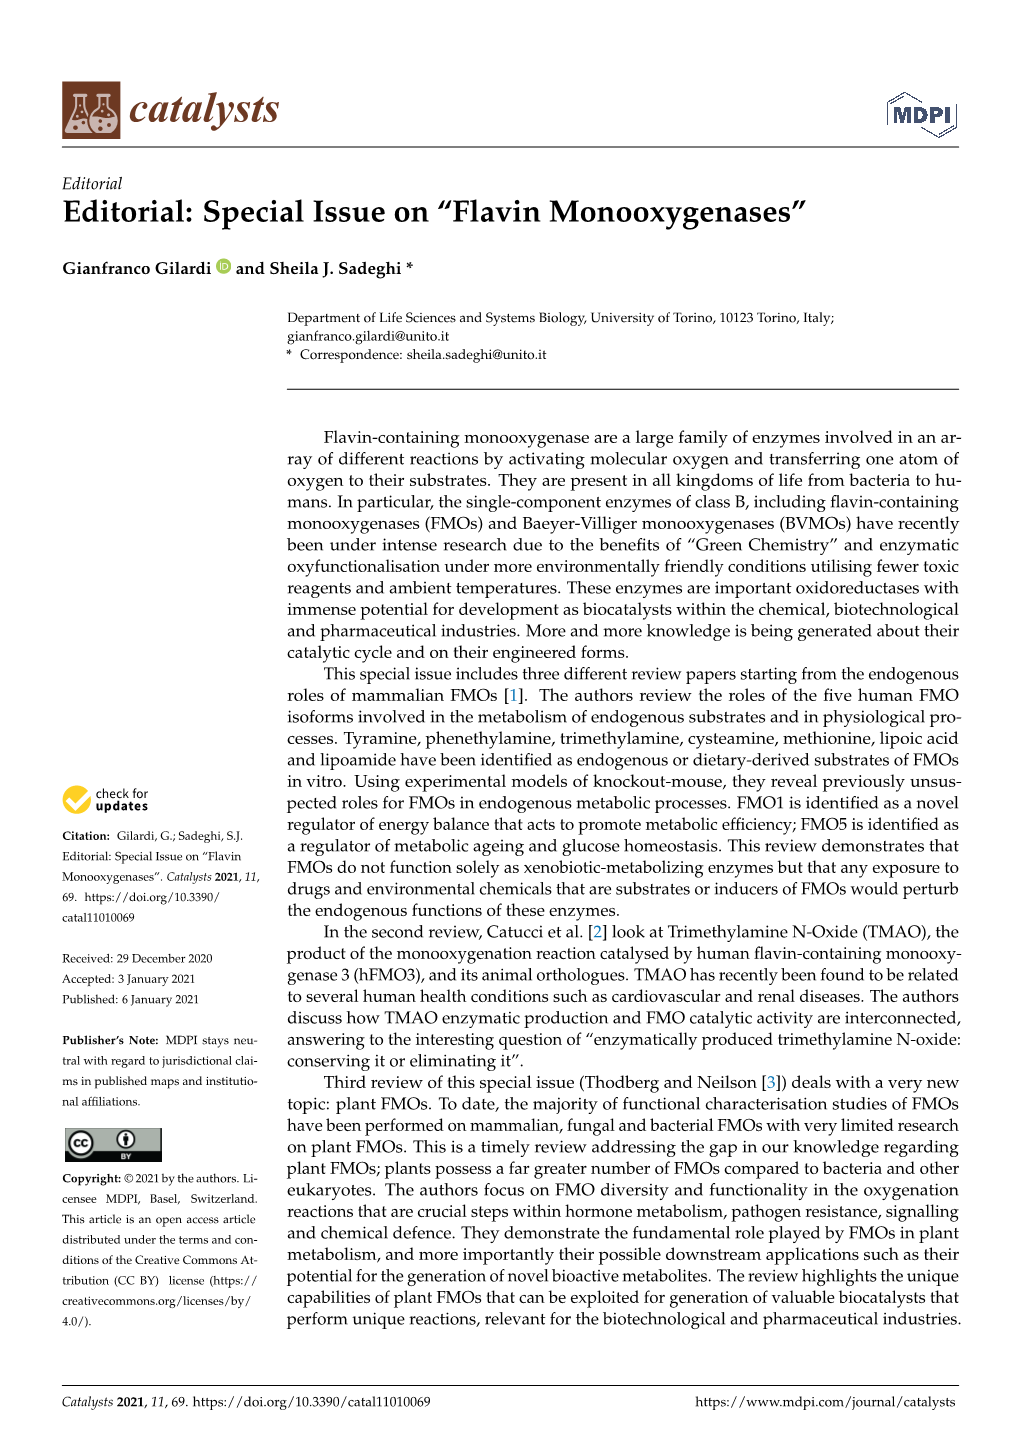 Editorial: Special Issue on “Flavin Monooxygenases”